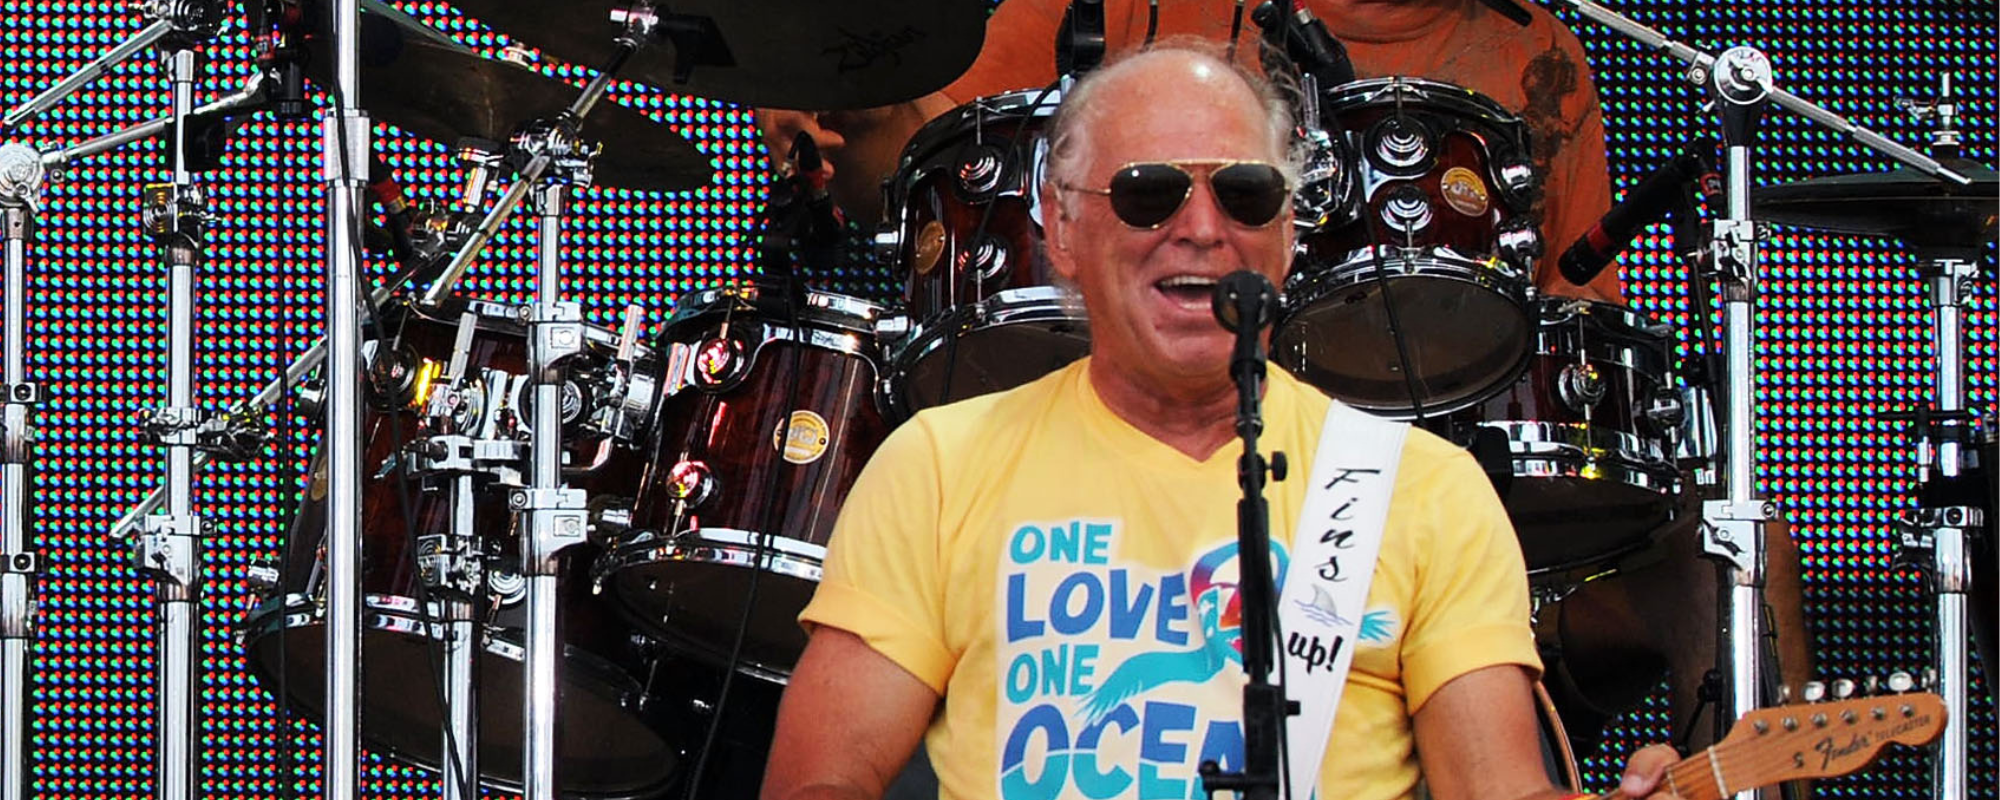 The Meaning Behind Jimmy Buffett’s Semi-Metaphorical “Trying to Reason With Hurricane Season”